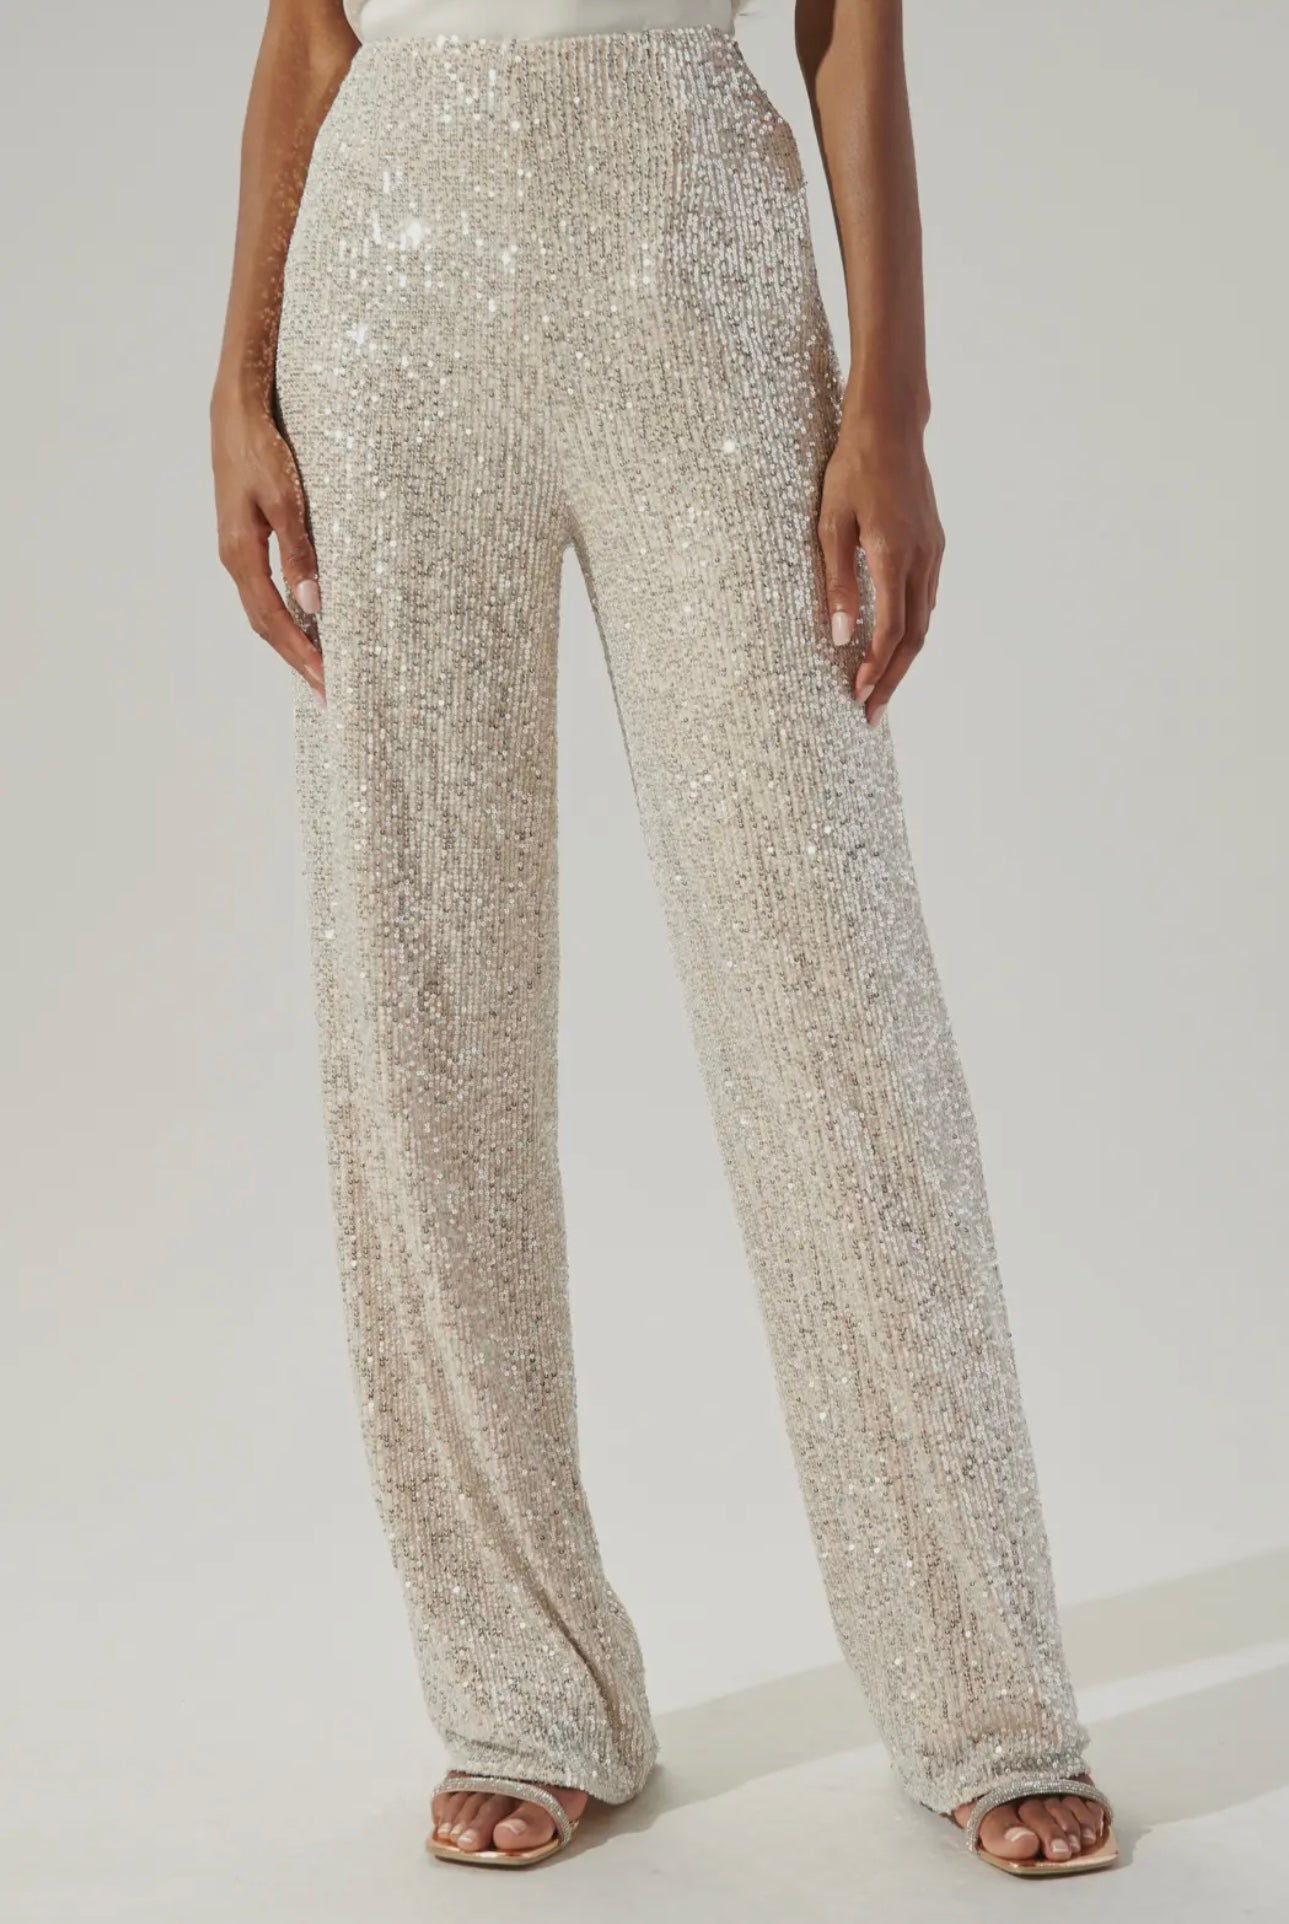 Friday Night High Waisted Sequin Pant